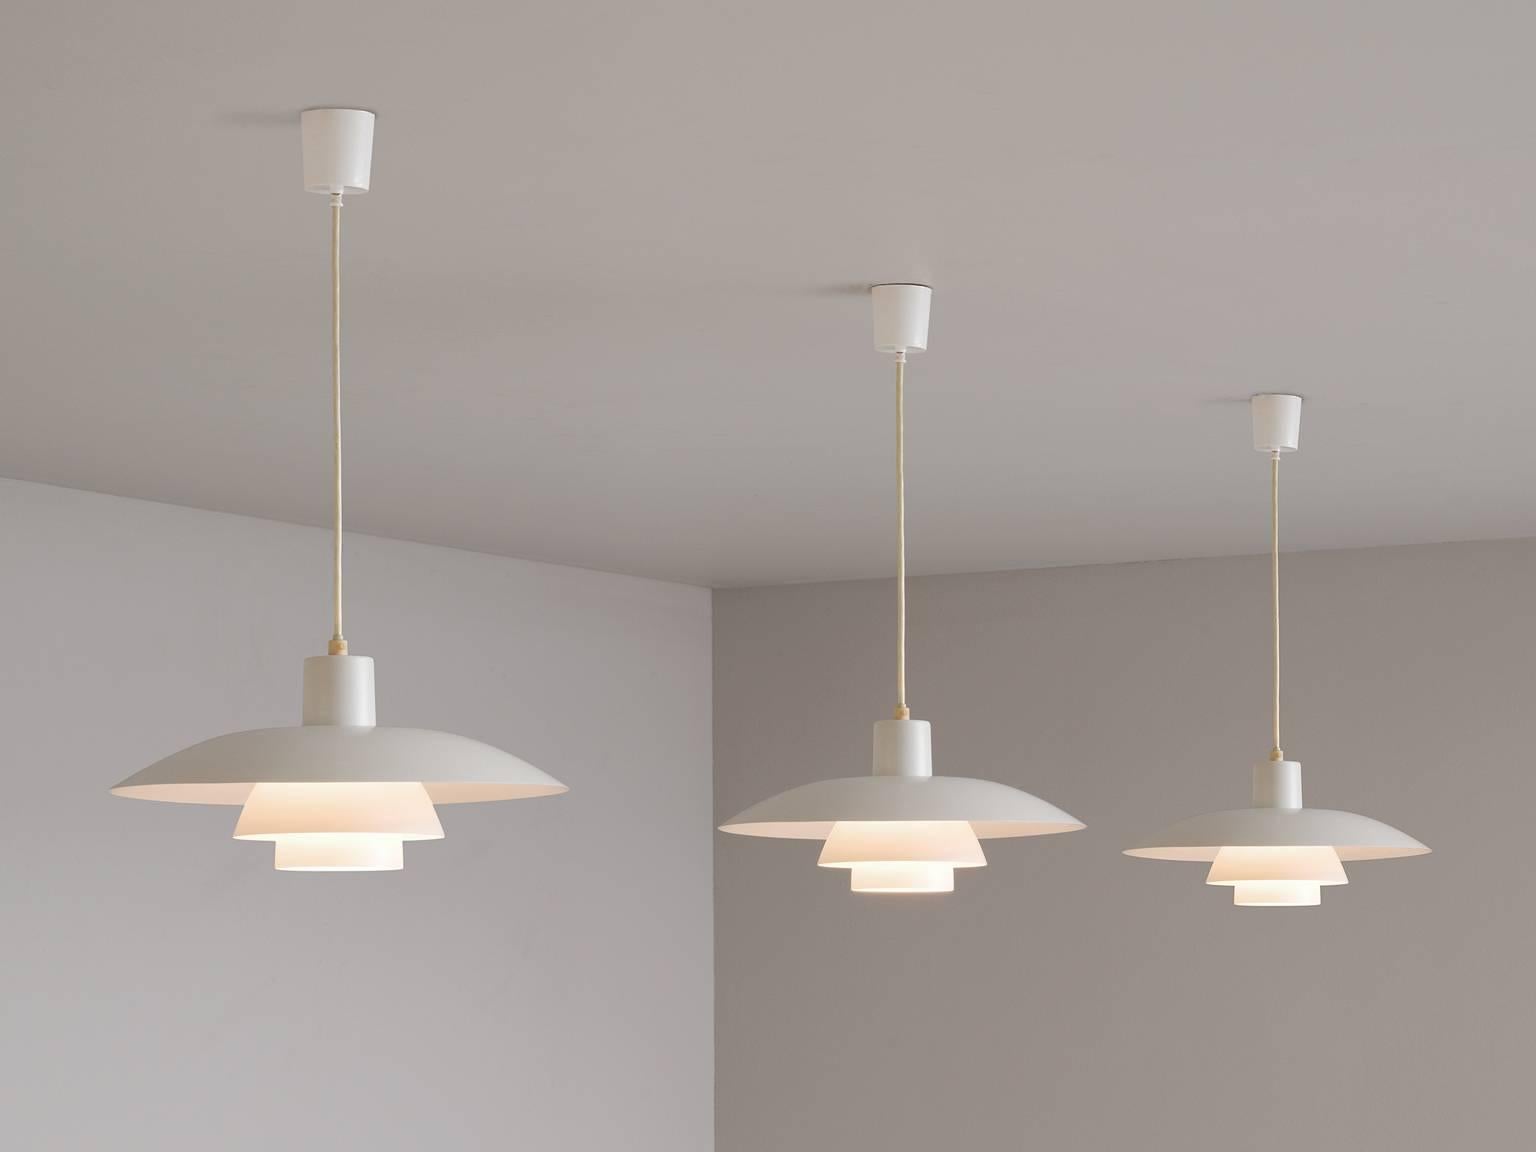 Set of three pendants model PH4/3, in metal, by Poul Henningsen for Louis Poulsen, Denmark, 1950s. 

Set of three iconic PH chandeliers designed by Poul Henningsen. Consisting of three curved shades of white coated metal. The spectator has no direct